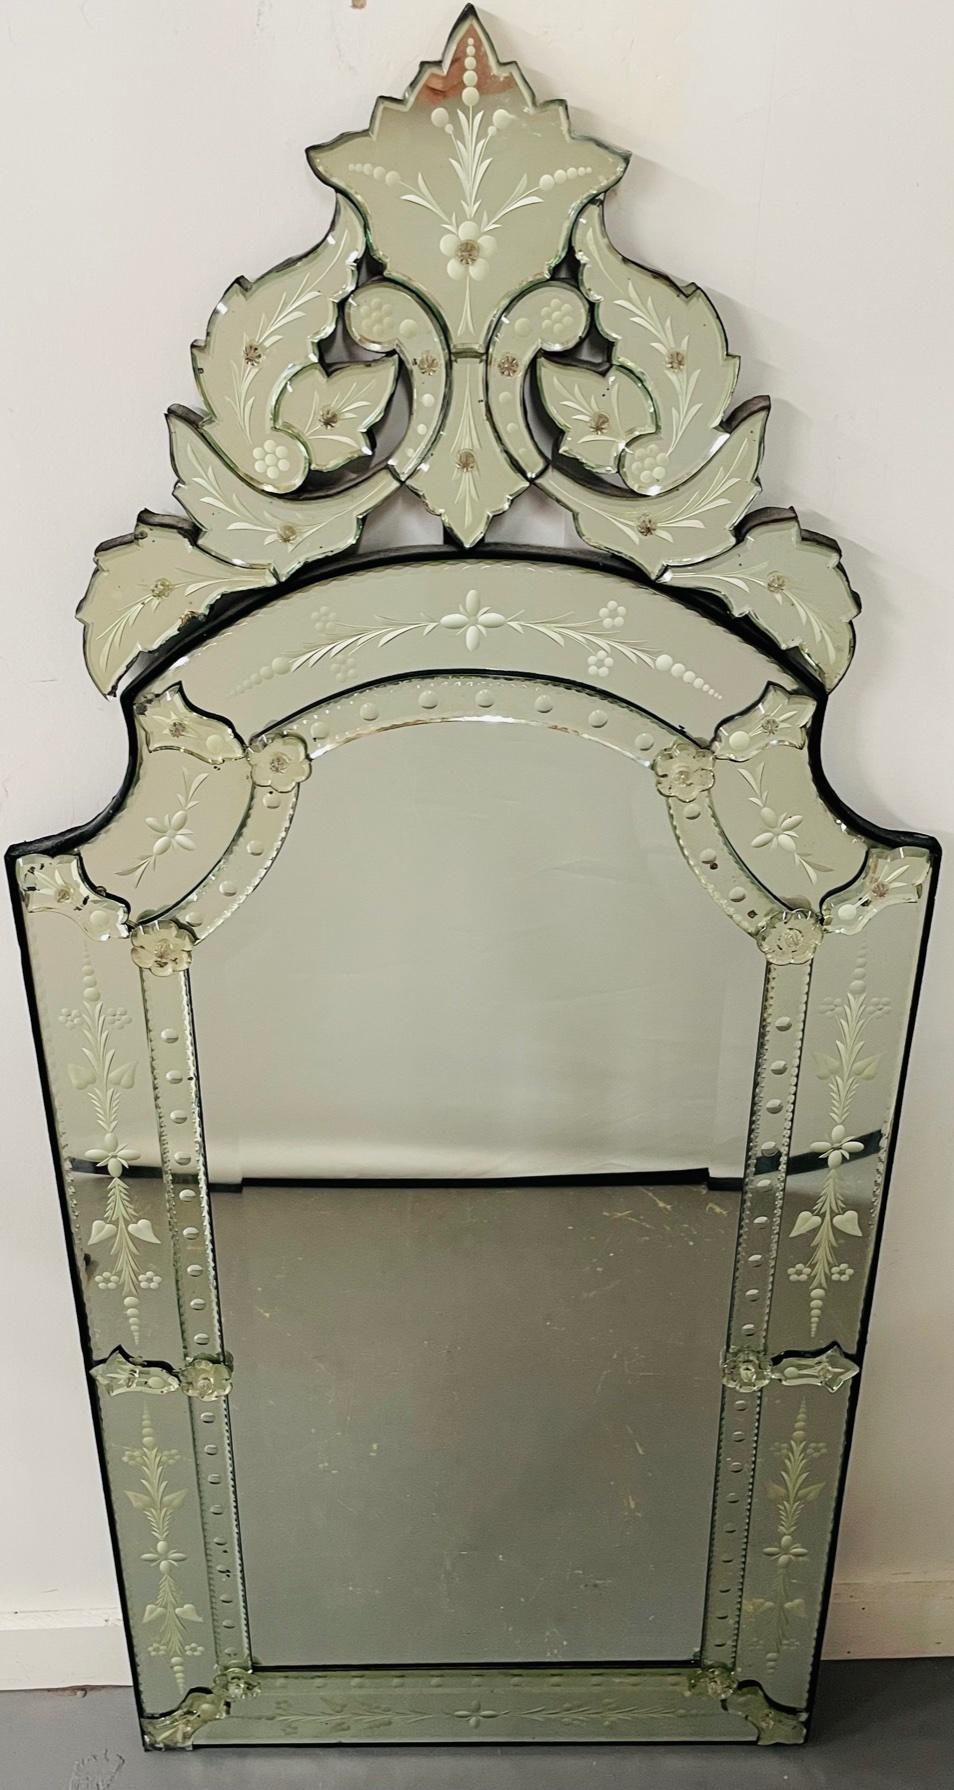 An exceptional antique Venetian etched glass wall mirror. The Venetian mirror features beautiful acanthus and floral etching design. The crown of the mirror is finely designed in acanthus pieces, adding style and elegance to this refined wall piece.